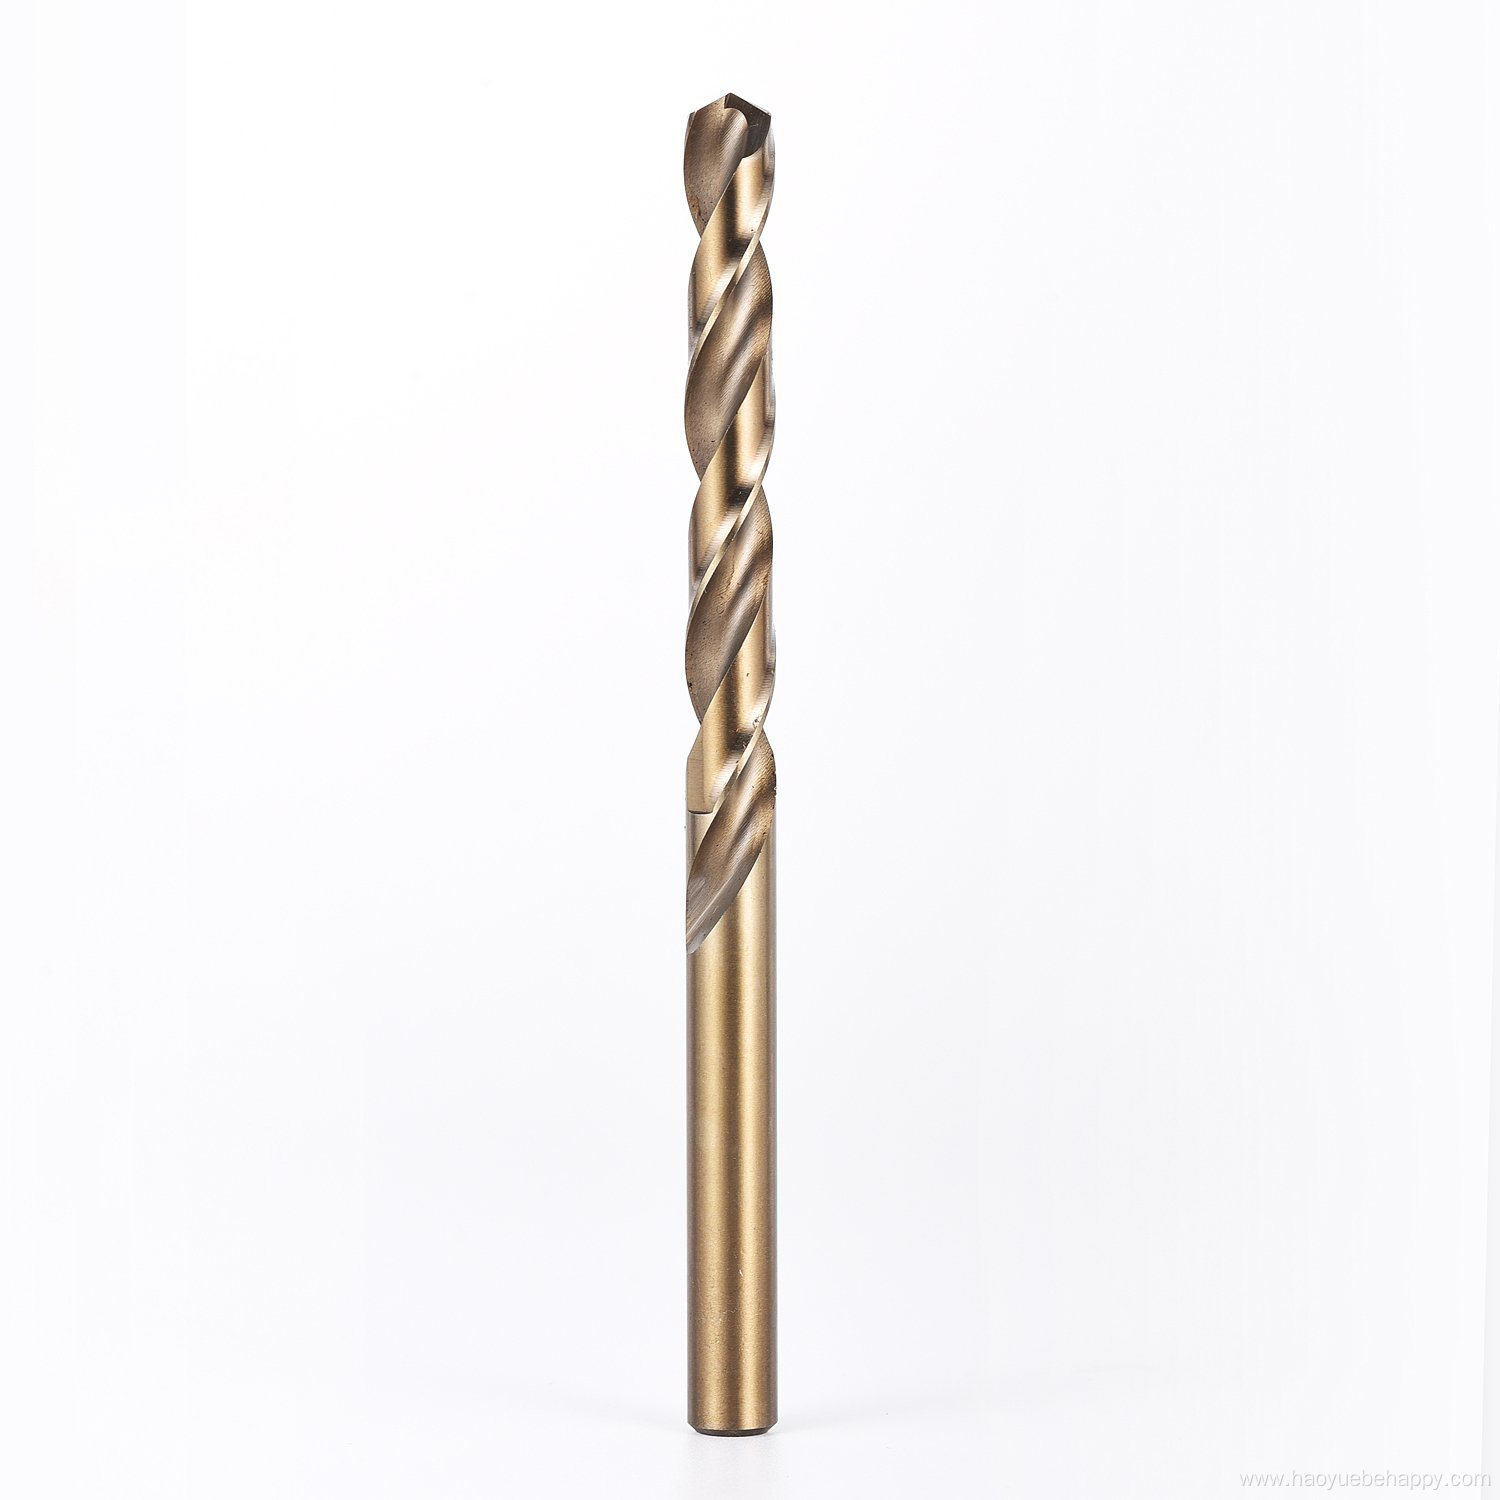 Twist Drill Bits Shank Copper Alloy and Softer